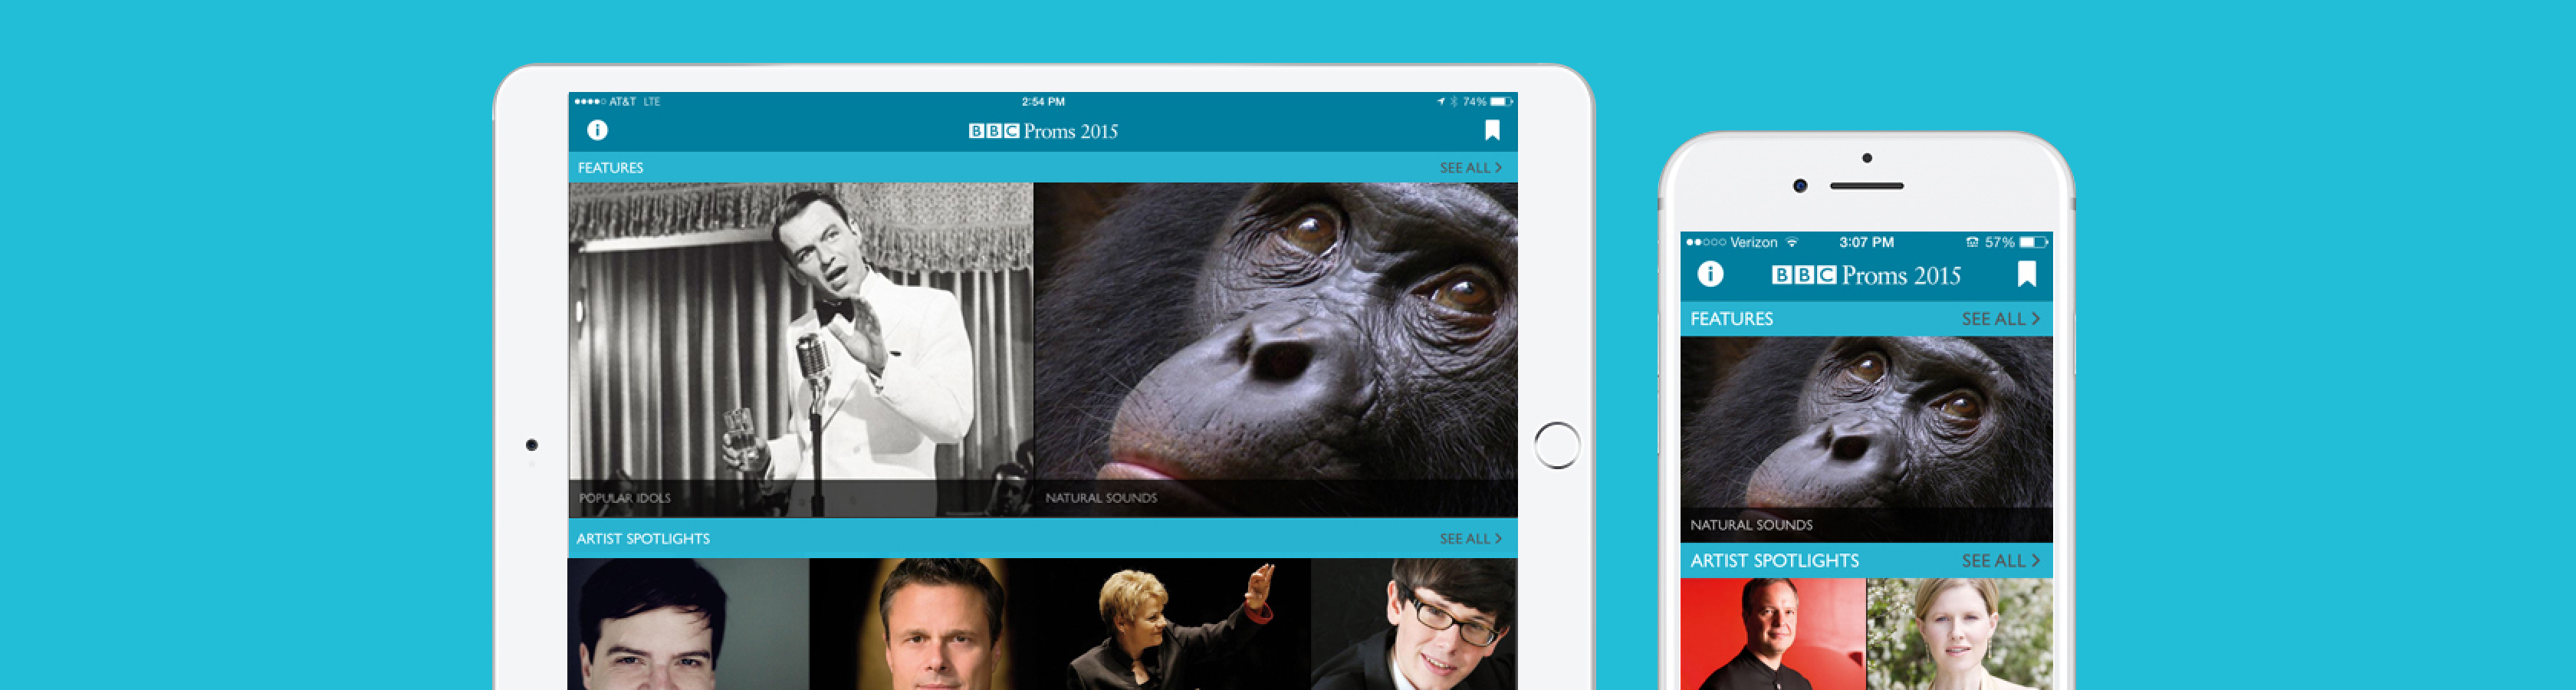 BBC Proms screens on tablet and iPhone